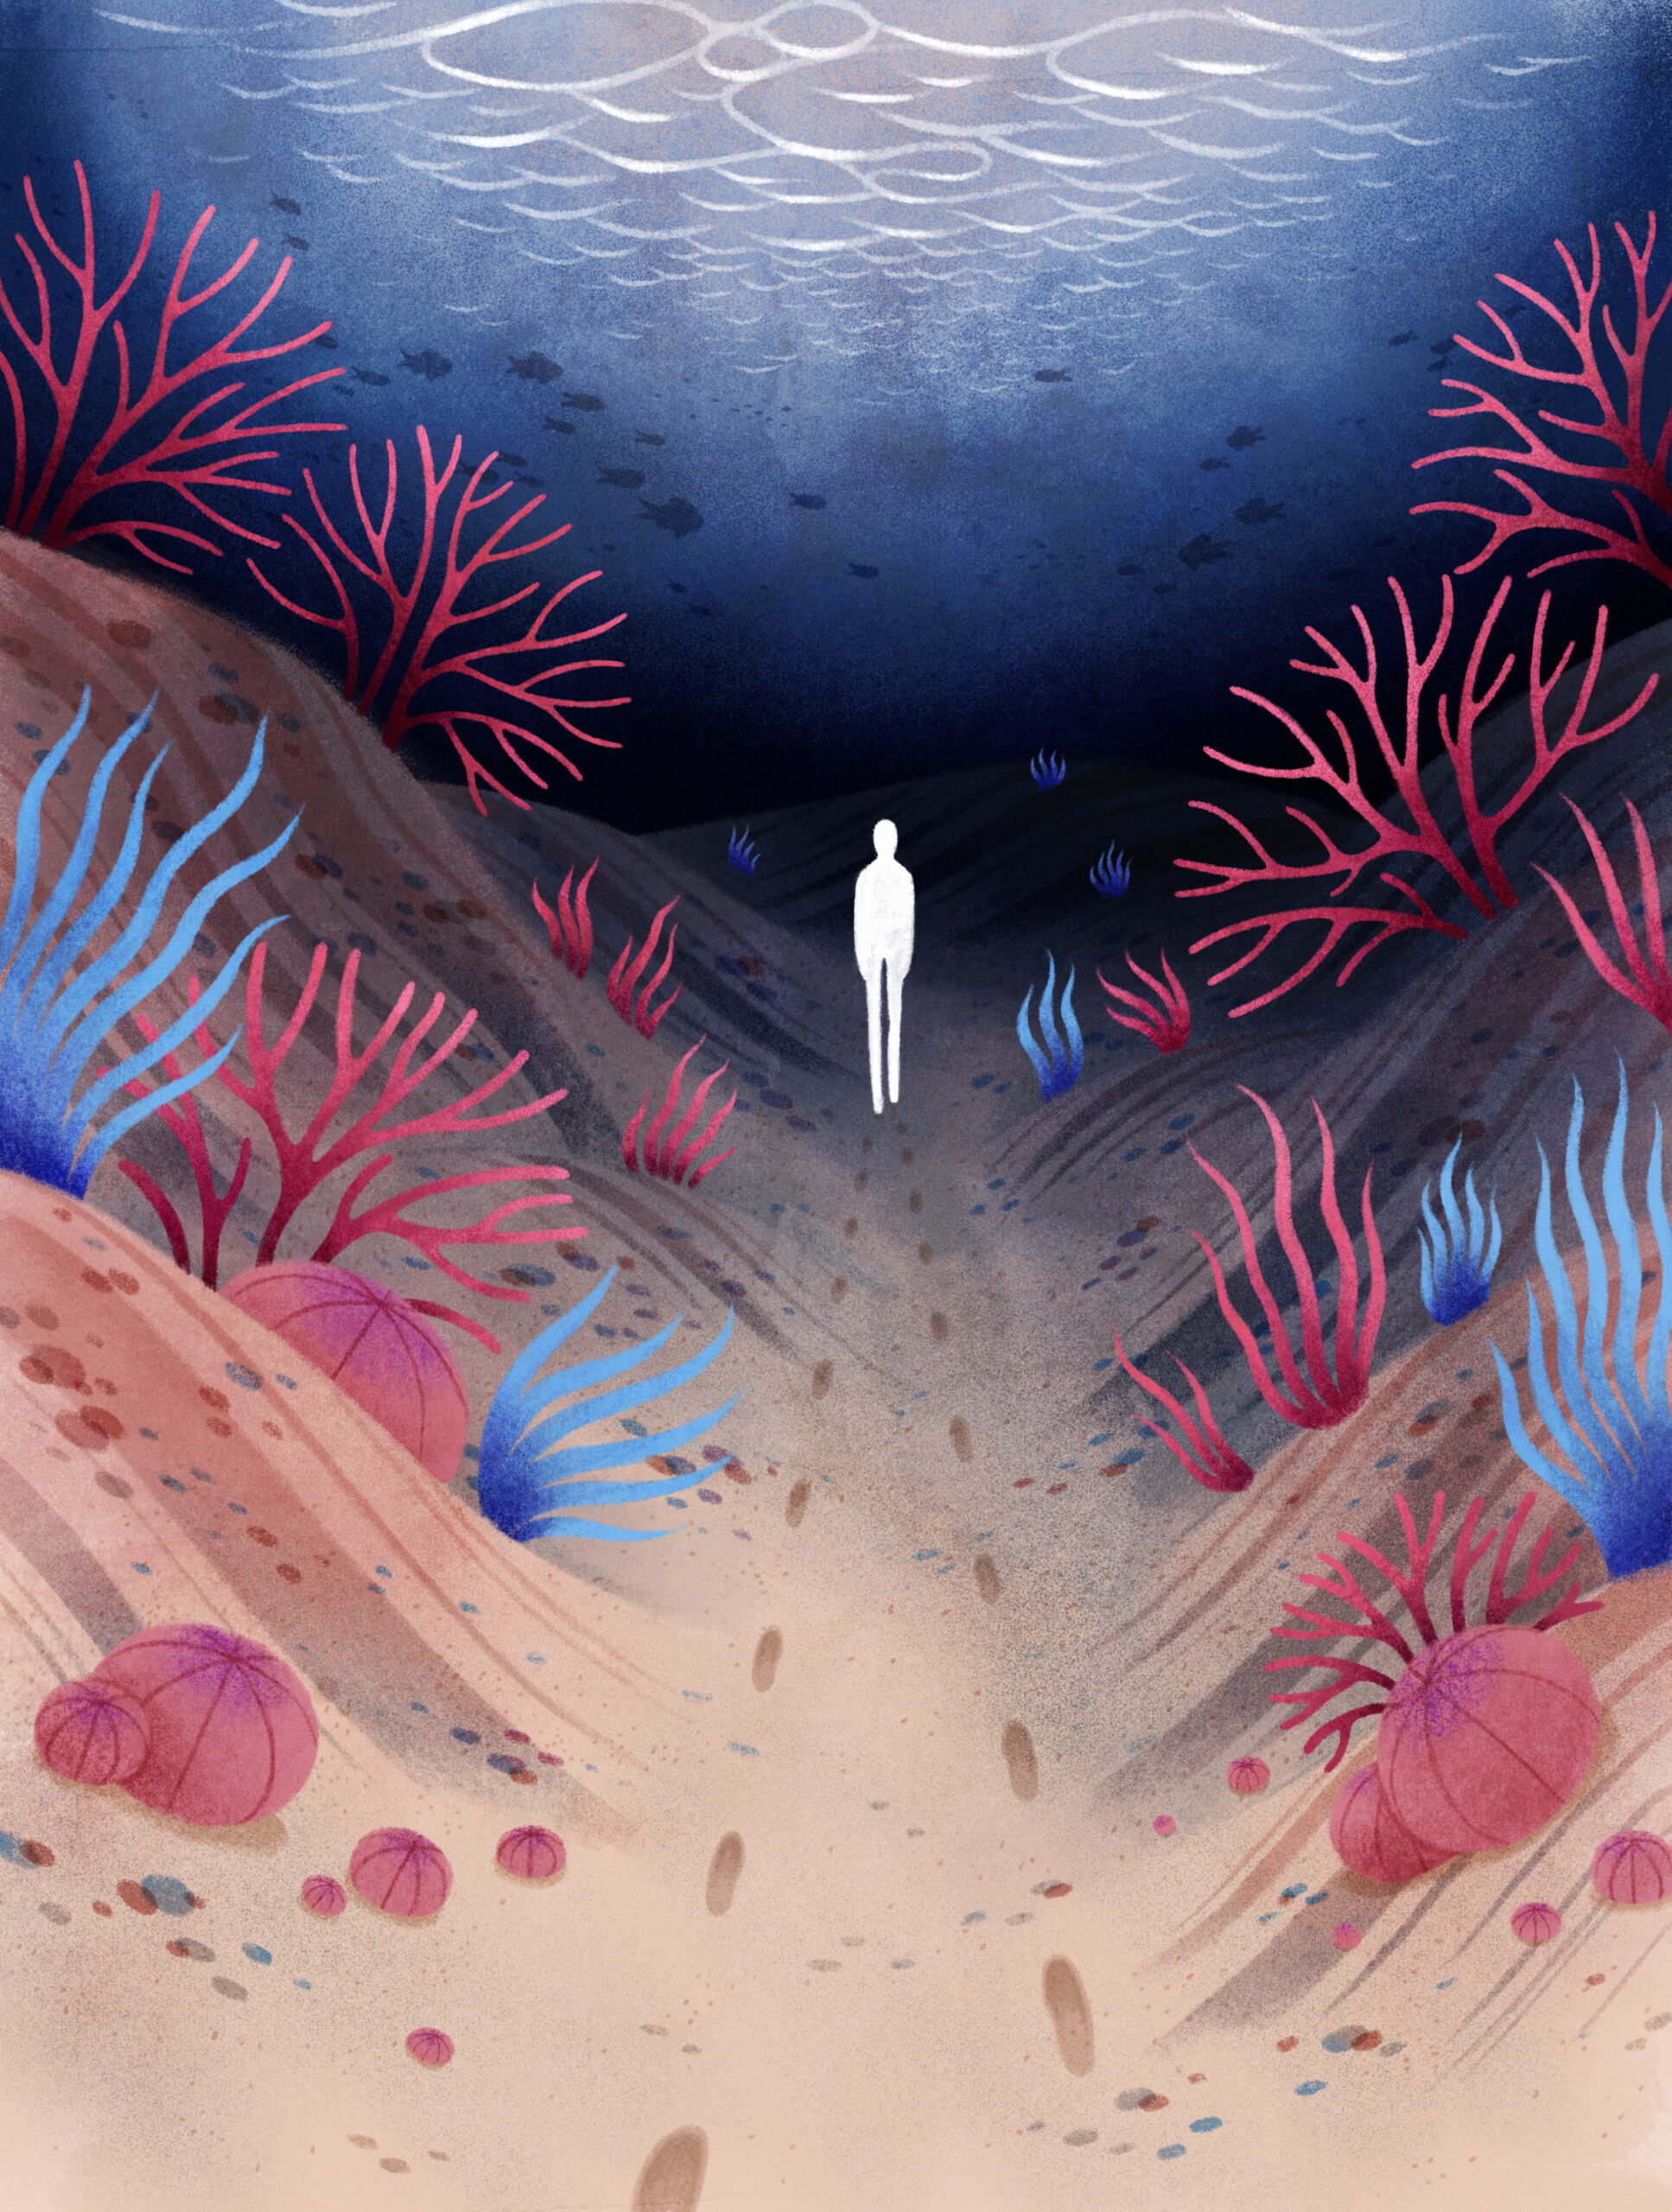 Illustration of a lone silhouette walking through a barren, stylized coral reef.